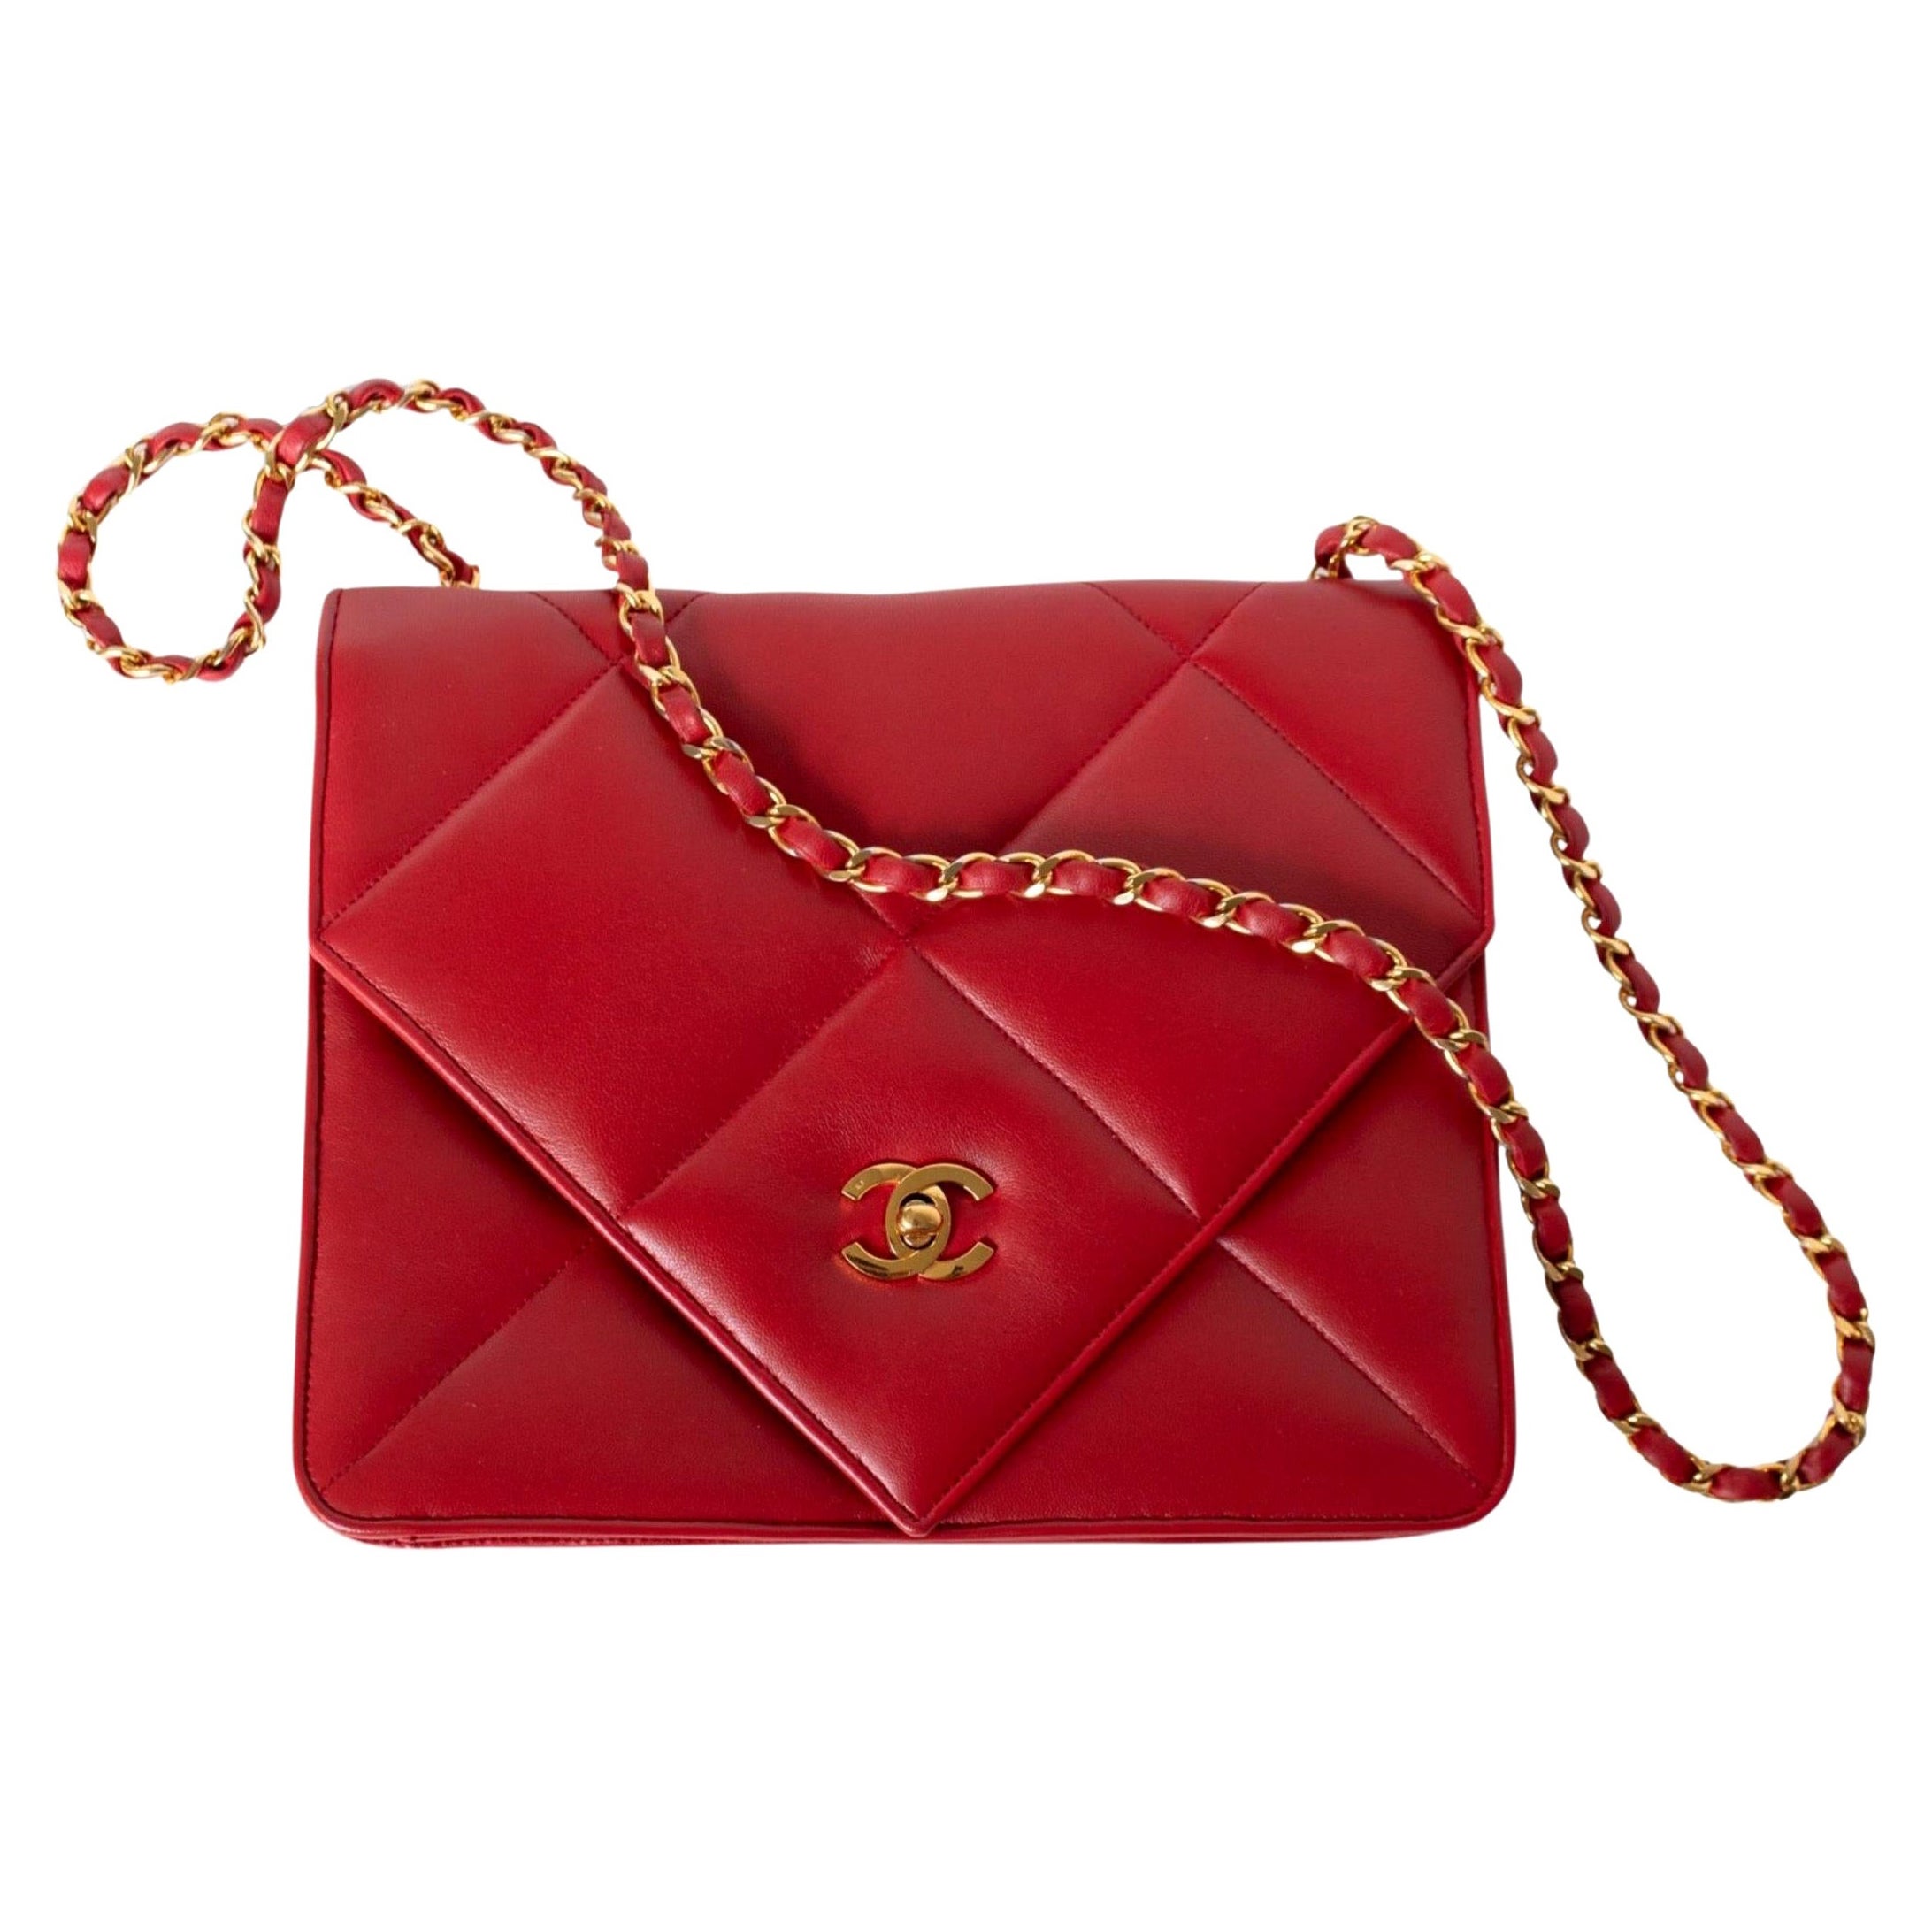 Classic Chanel 19 Vintage Rare 90s Jumbo Lambskin Red Envelope Flap Bag  For Sale